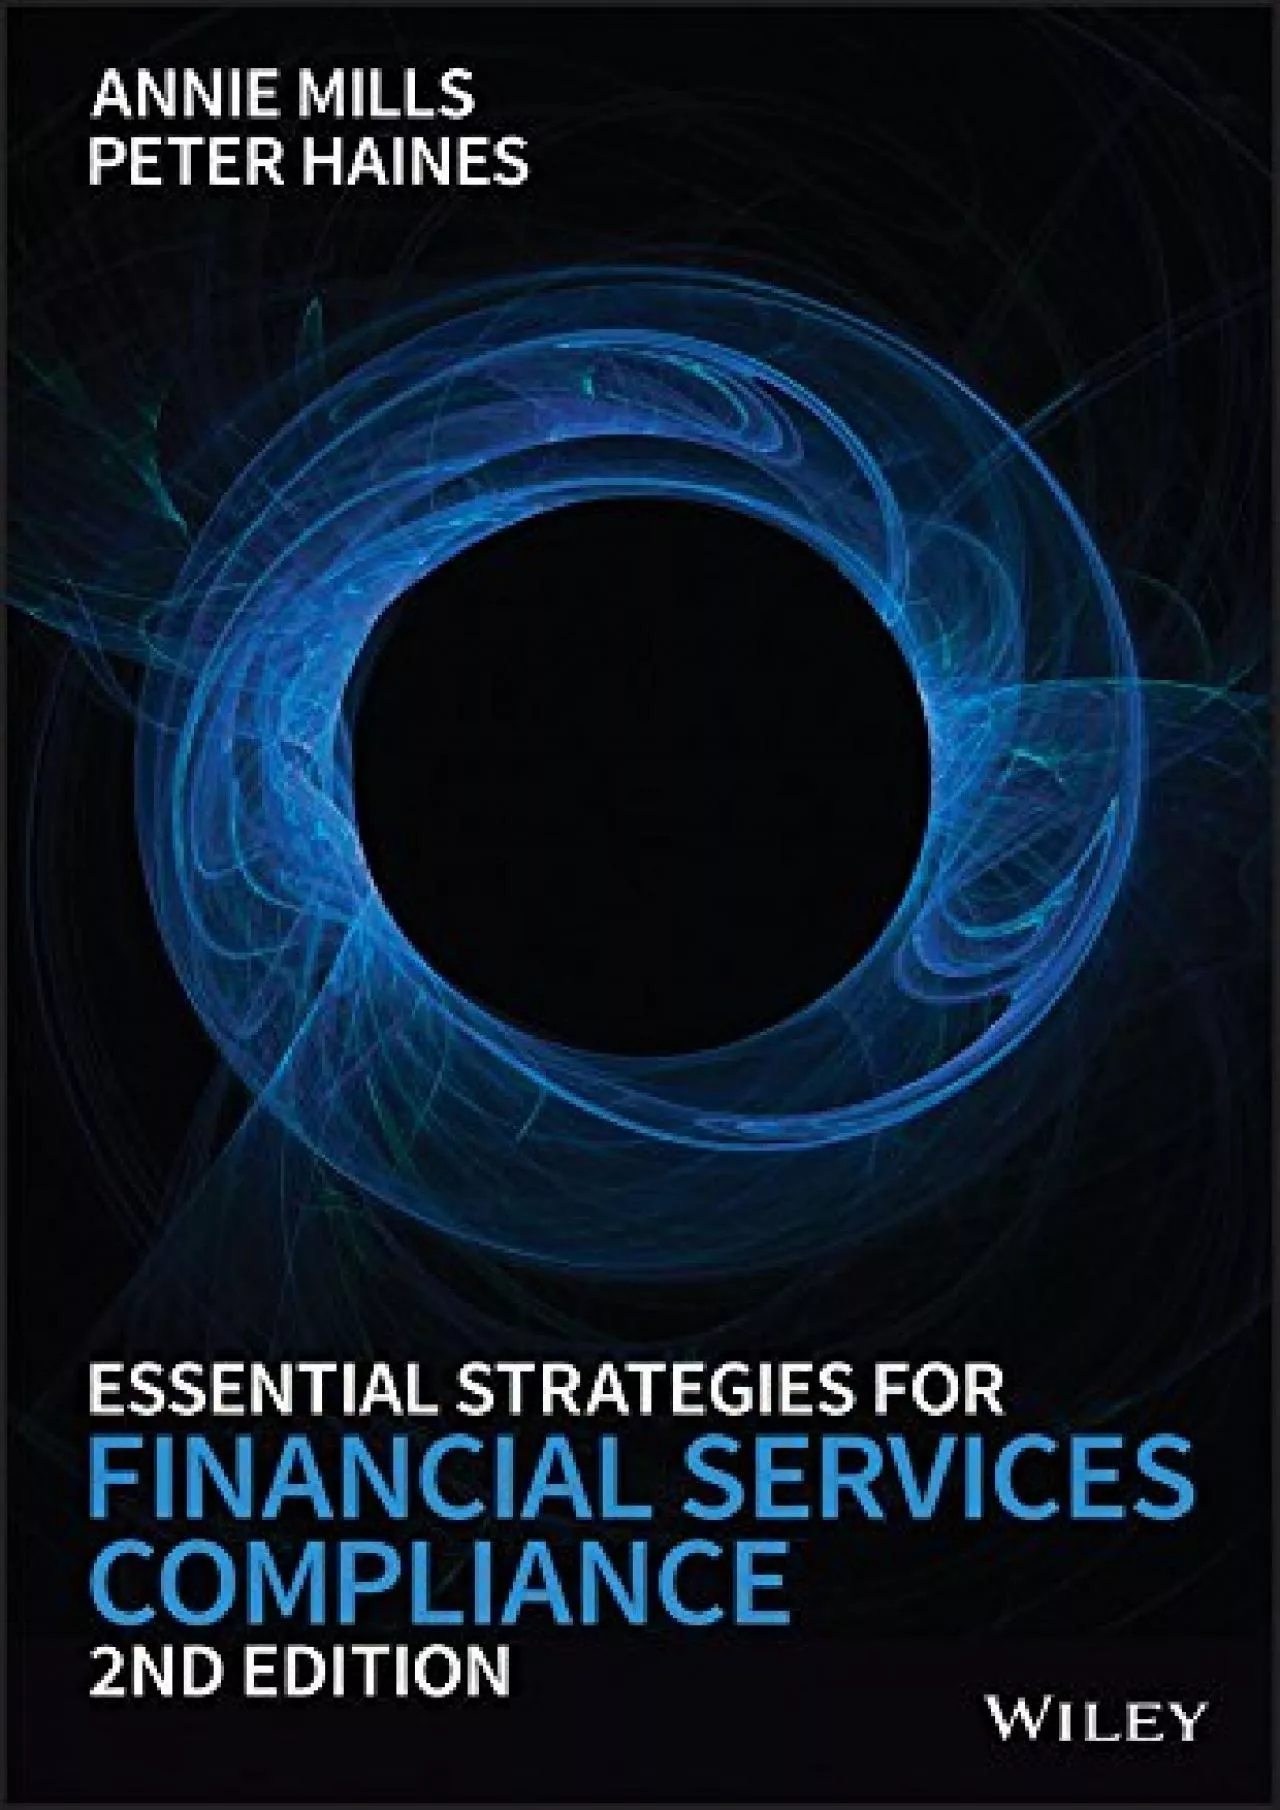 (DOWNLOAD)-Essential Strategies for Financial Services Compliance